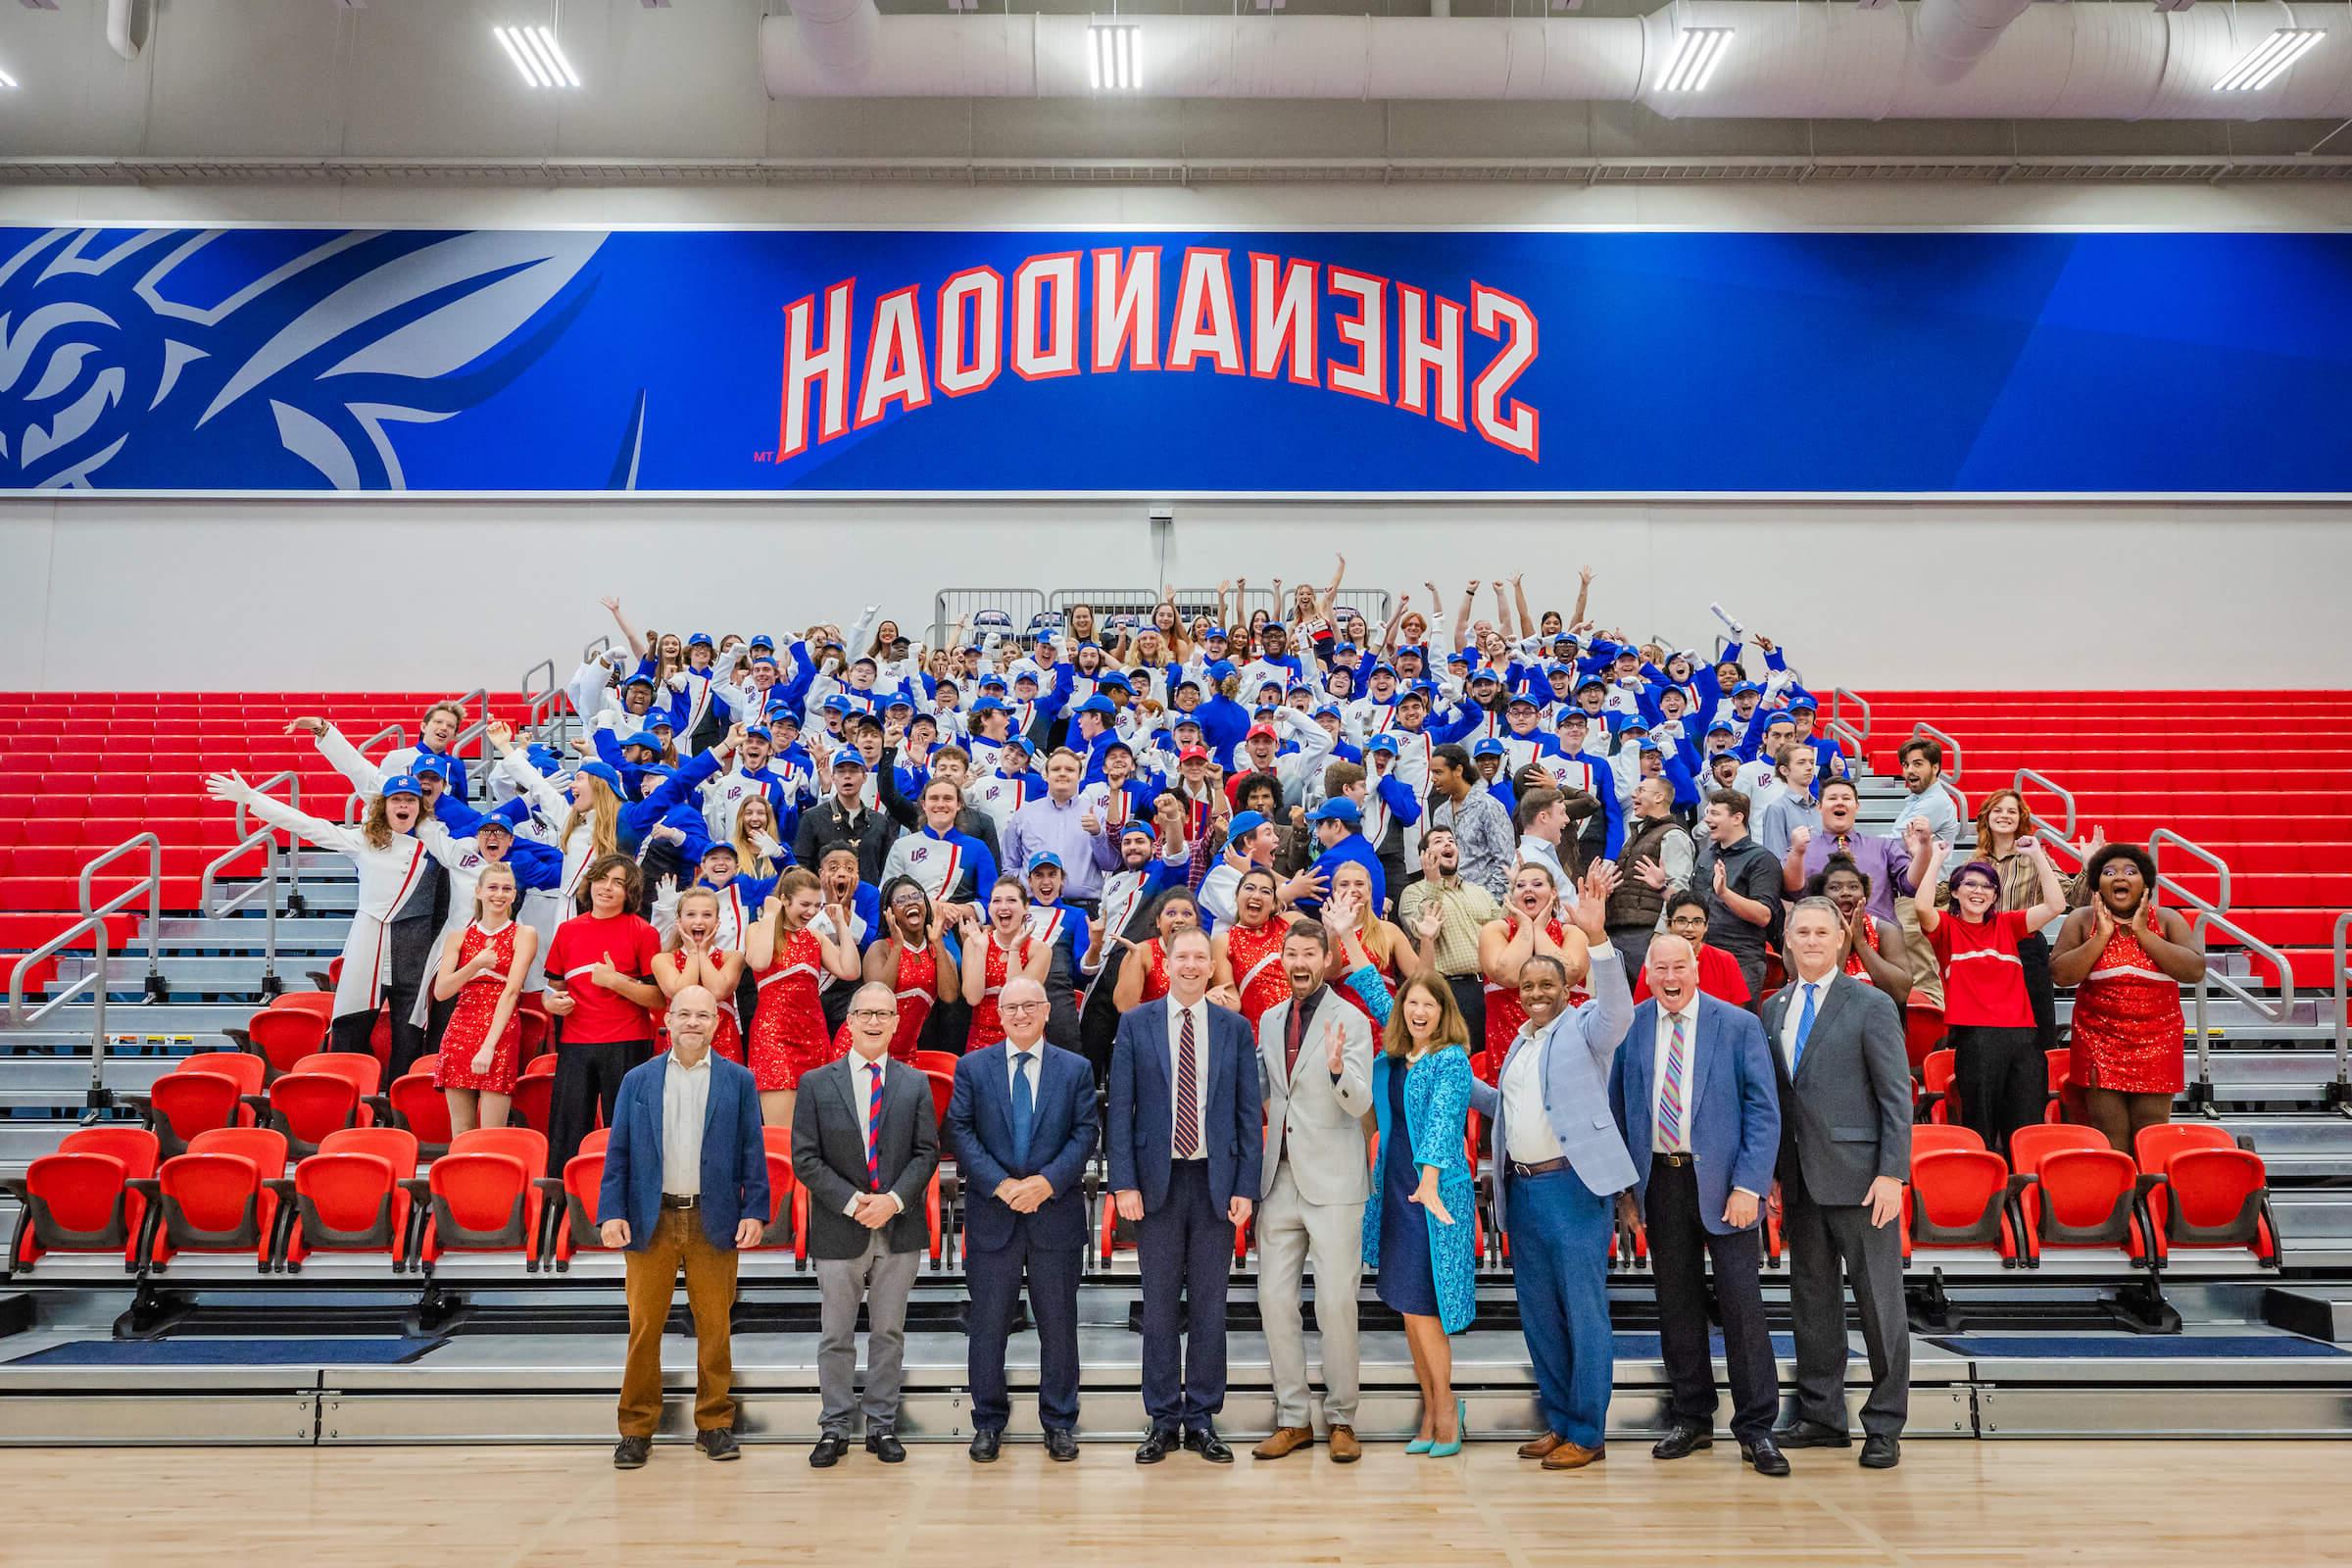 Shenandoah University Marching Band, cheerleaders, Studio Big Band, representatives from Shenandoah University, and organizers of London's New Year's Day Parade pose for a group photo in the Wilkins Athletics & Events Center